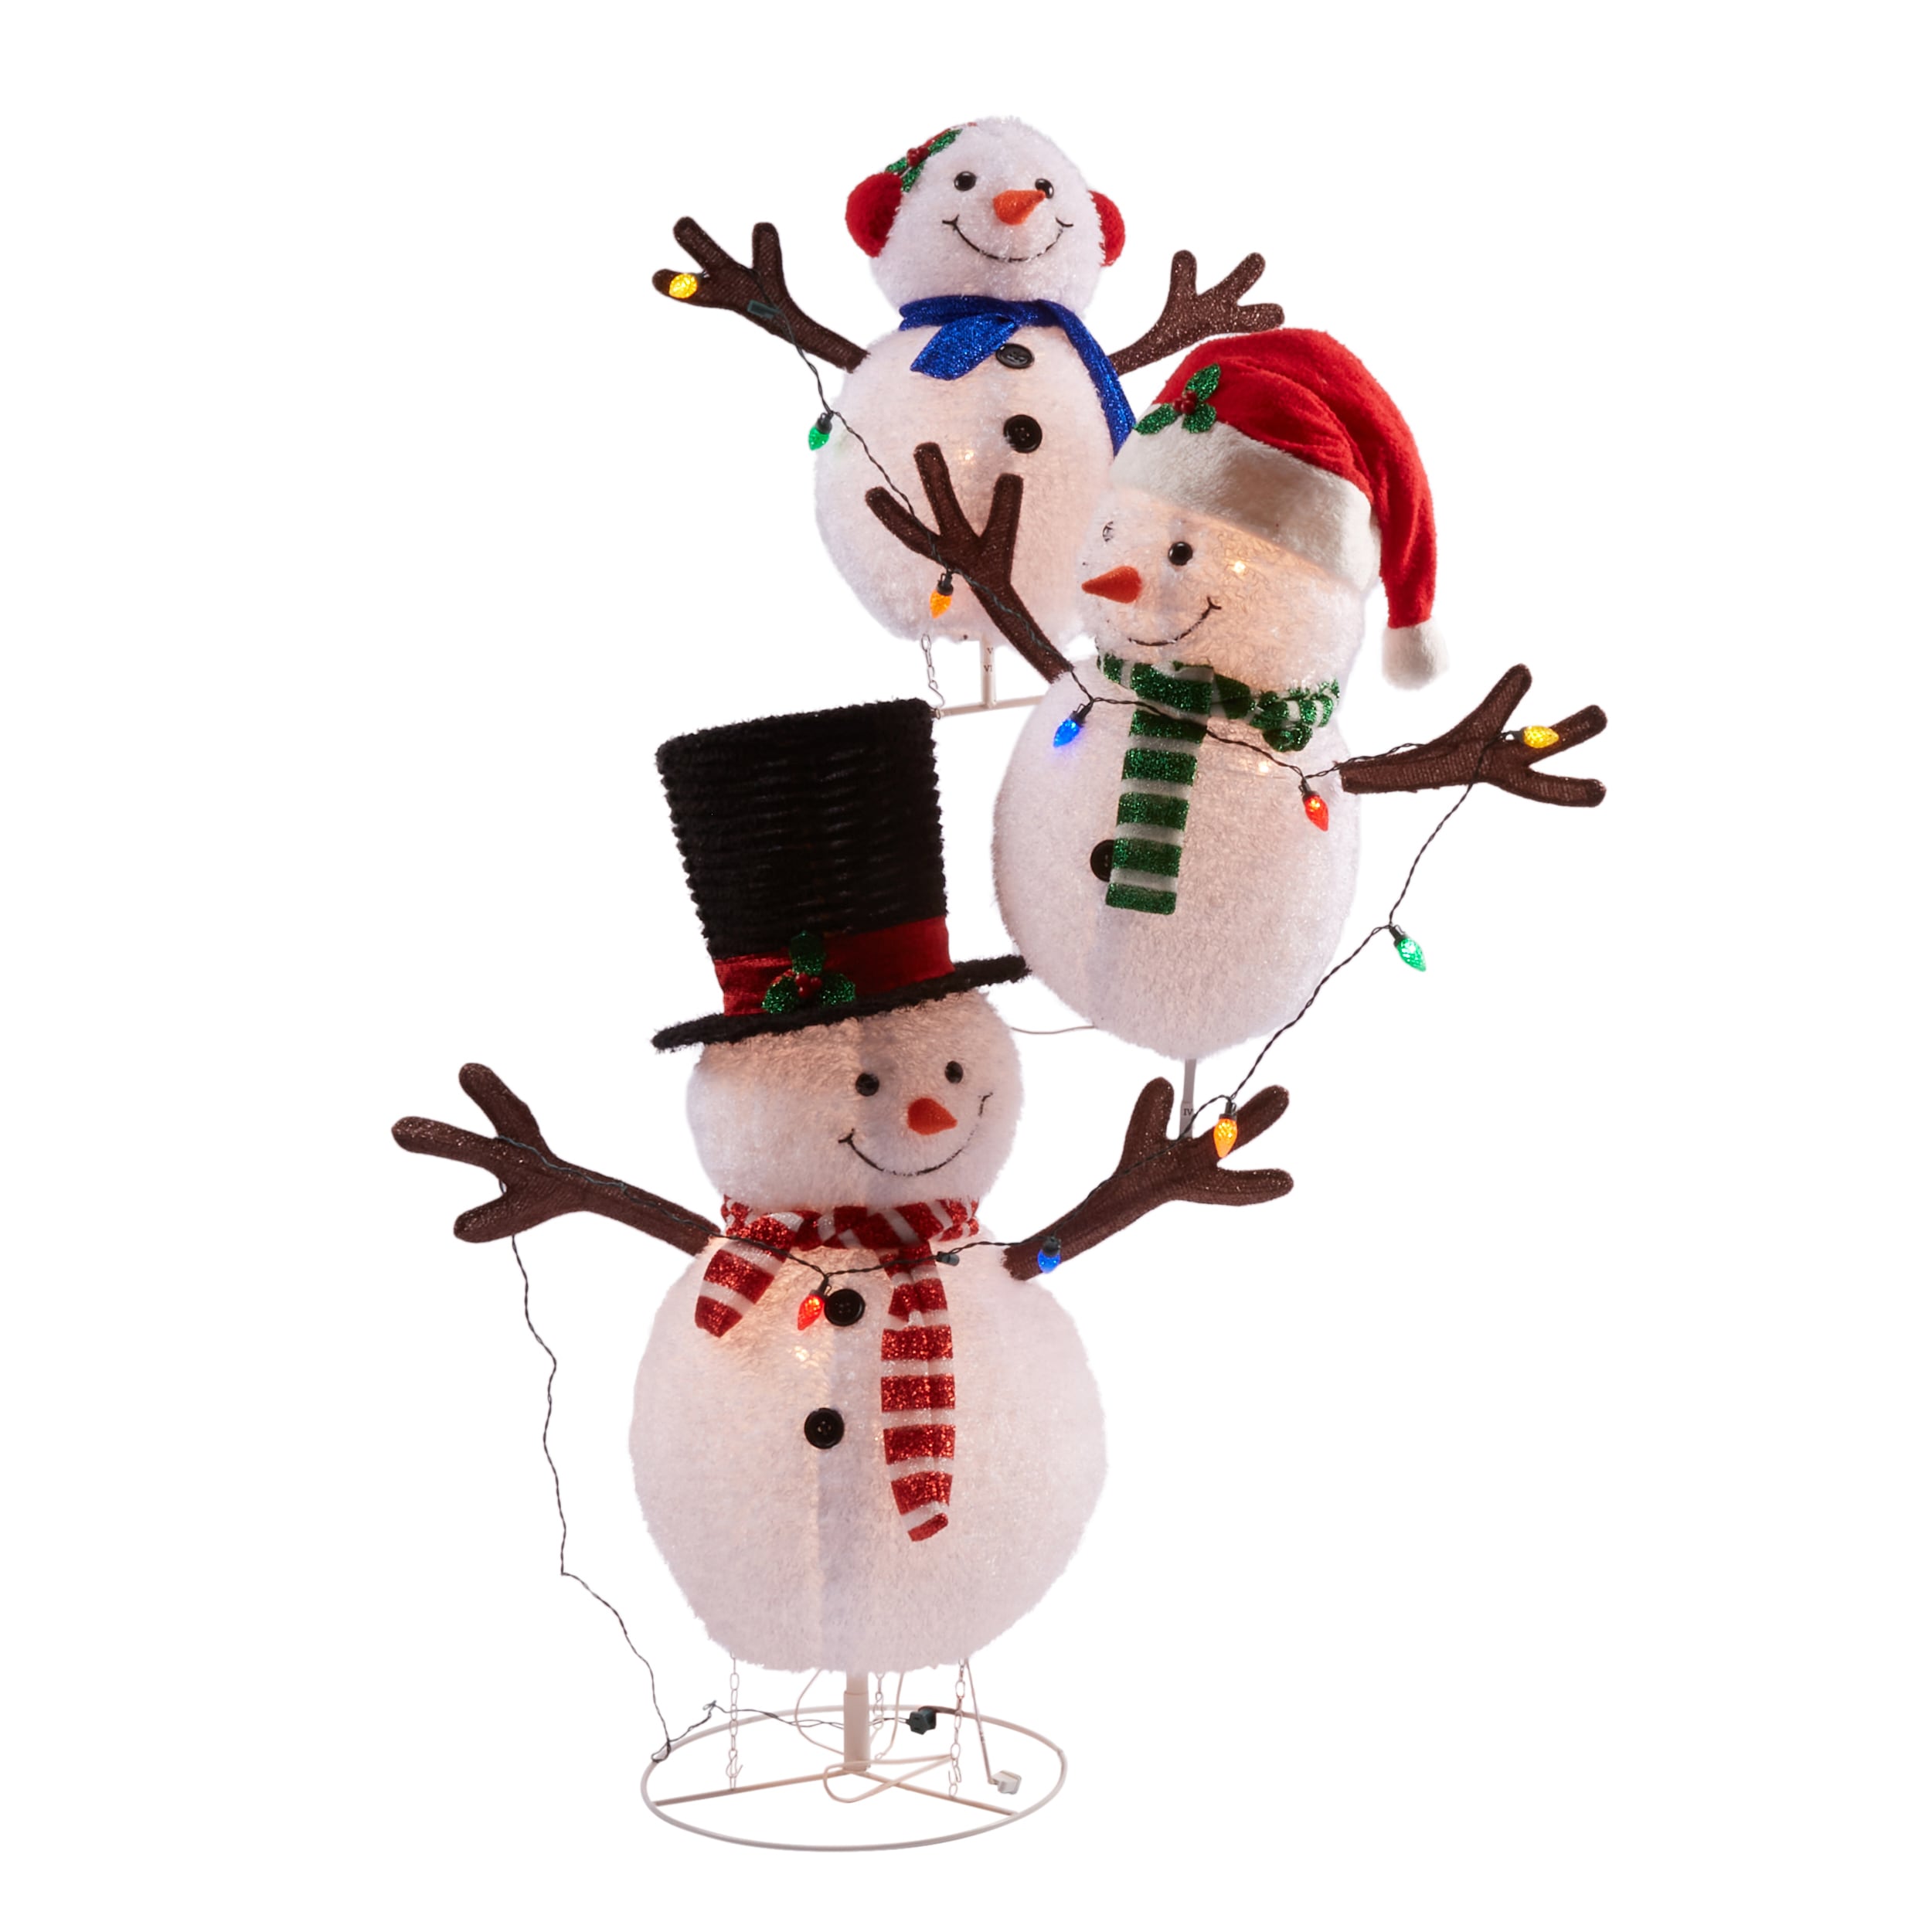 LN ProductWorks Red White Ice Cube 45 Lighted Snowman Display Holiday Decor